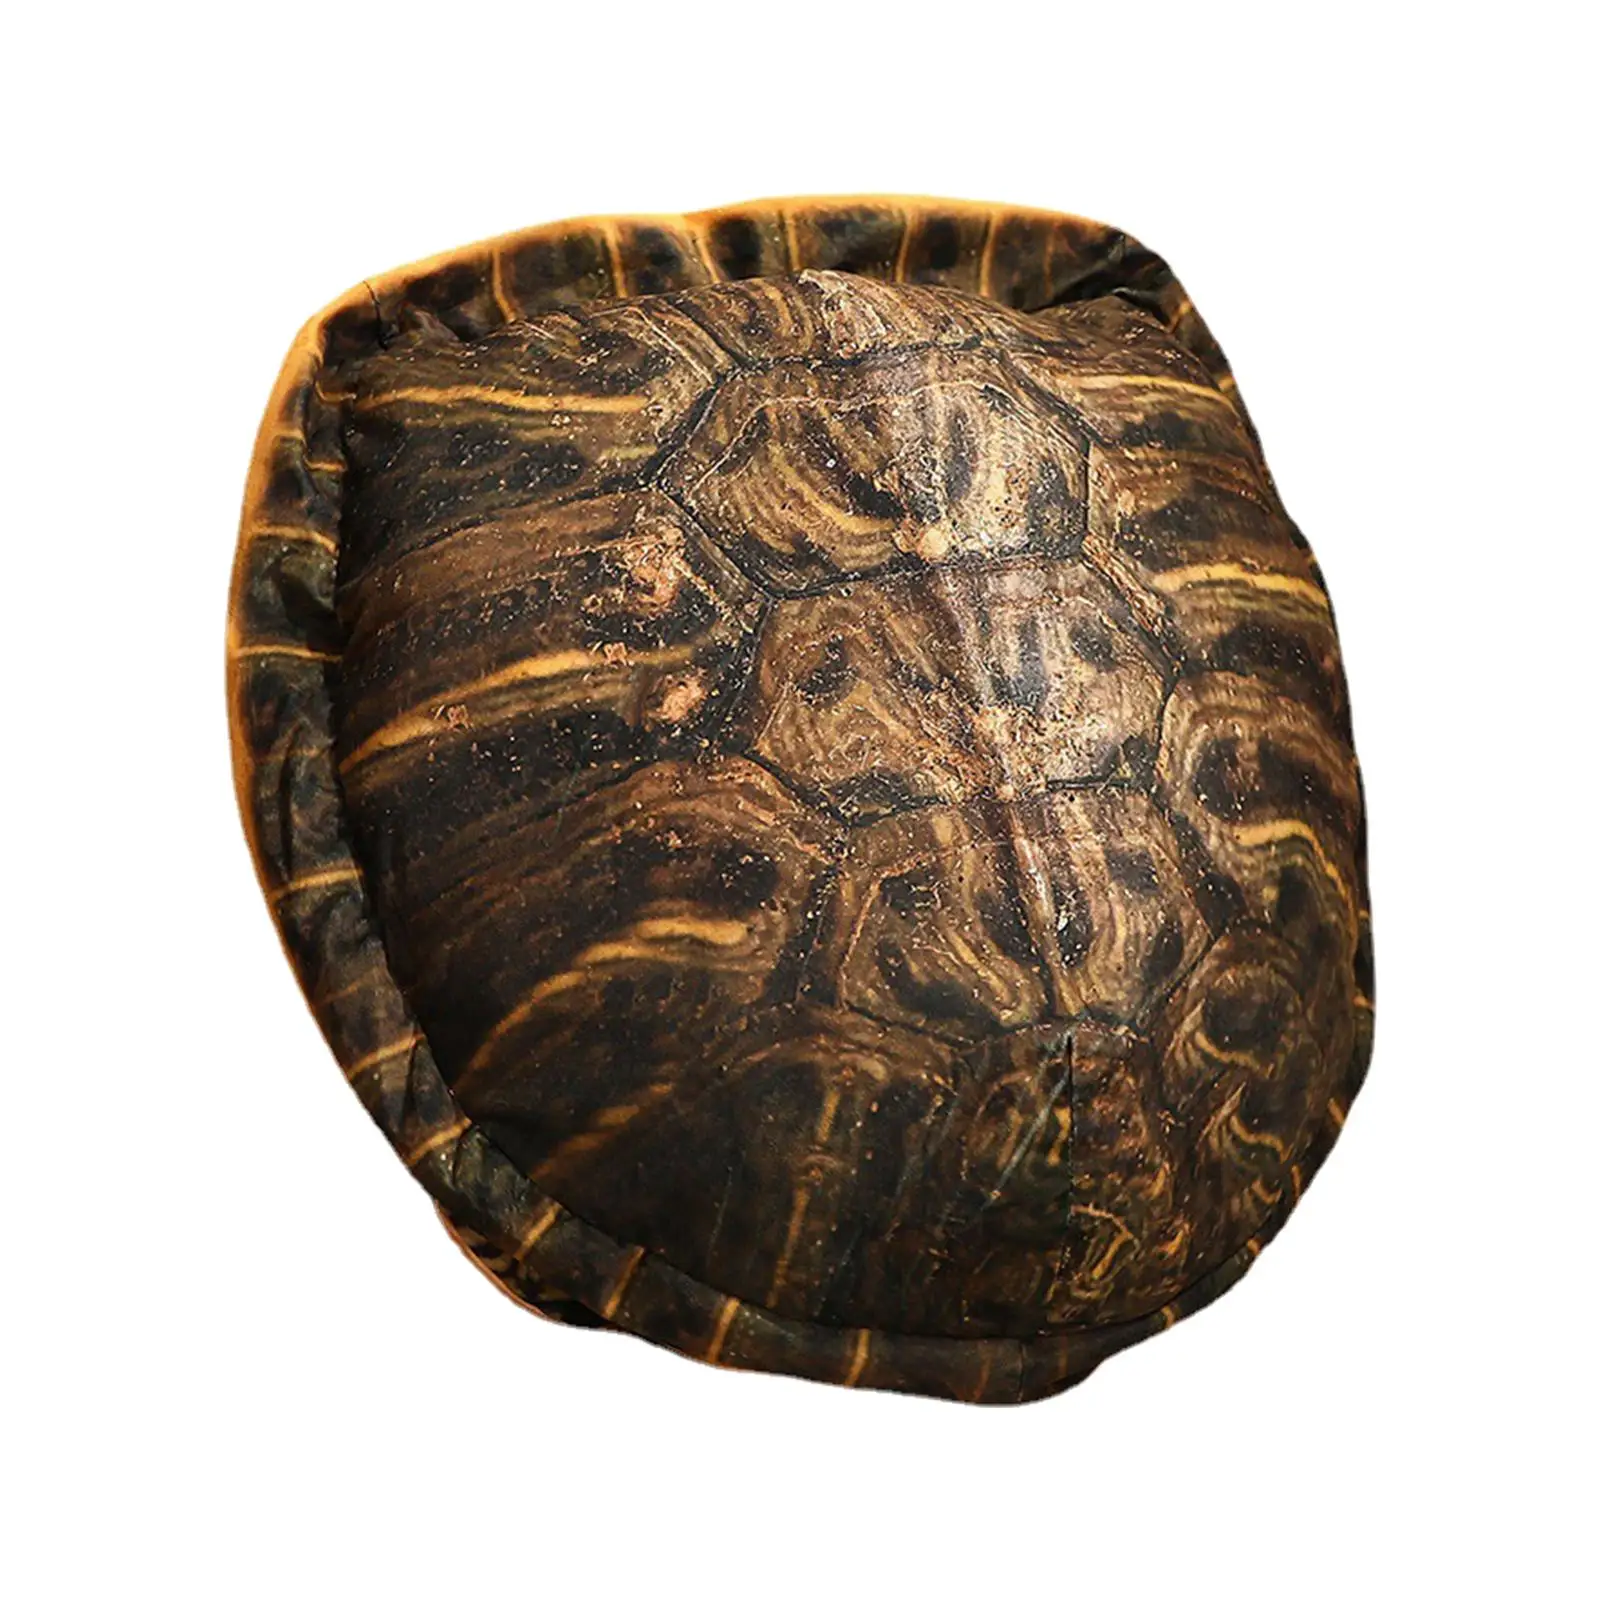 Funny Wearable Turtle Shell Pillows Birthday Gift Doll Toy Stuffed Animal Costume Plush Toy for Adults Role Play Offices Kids